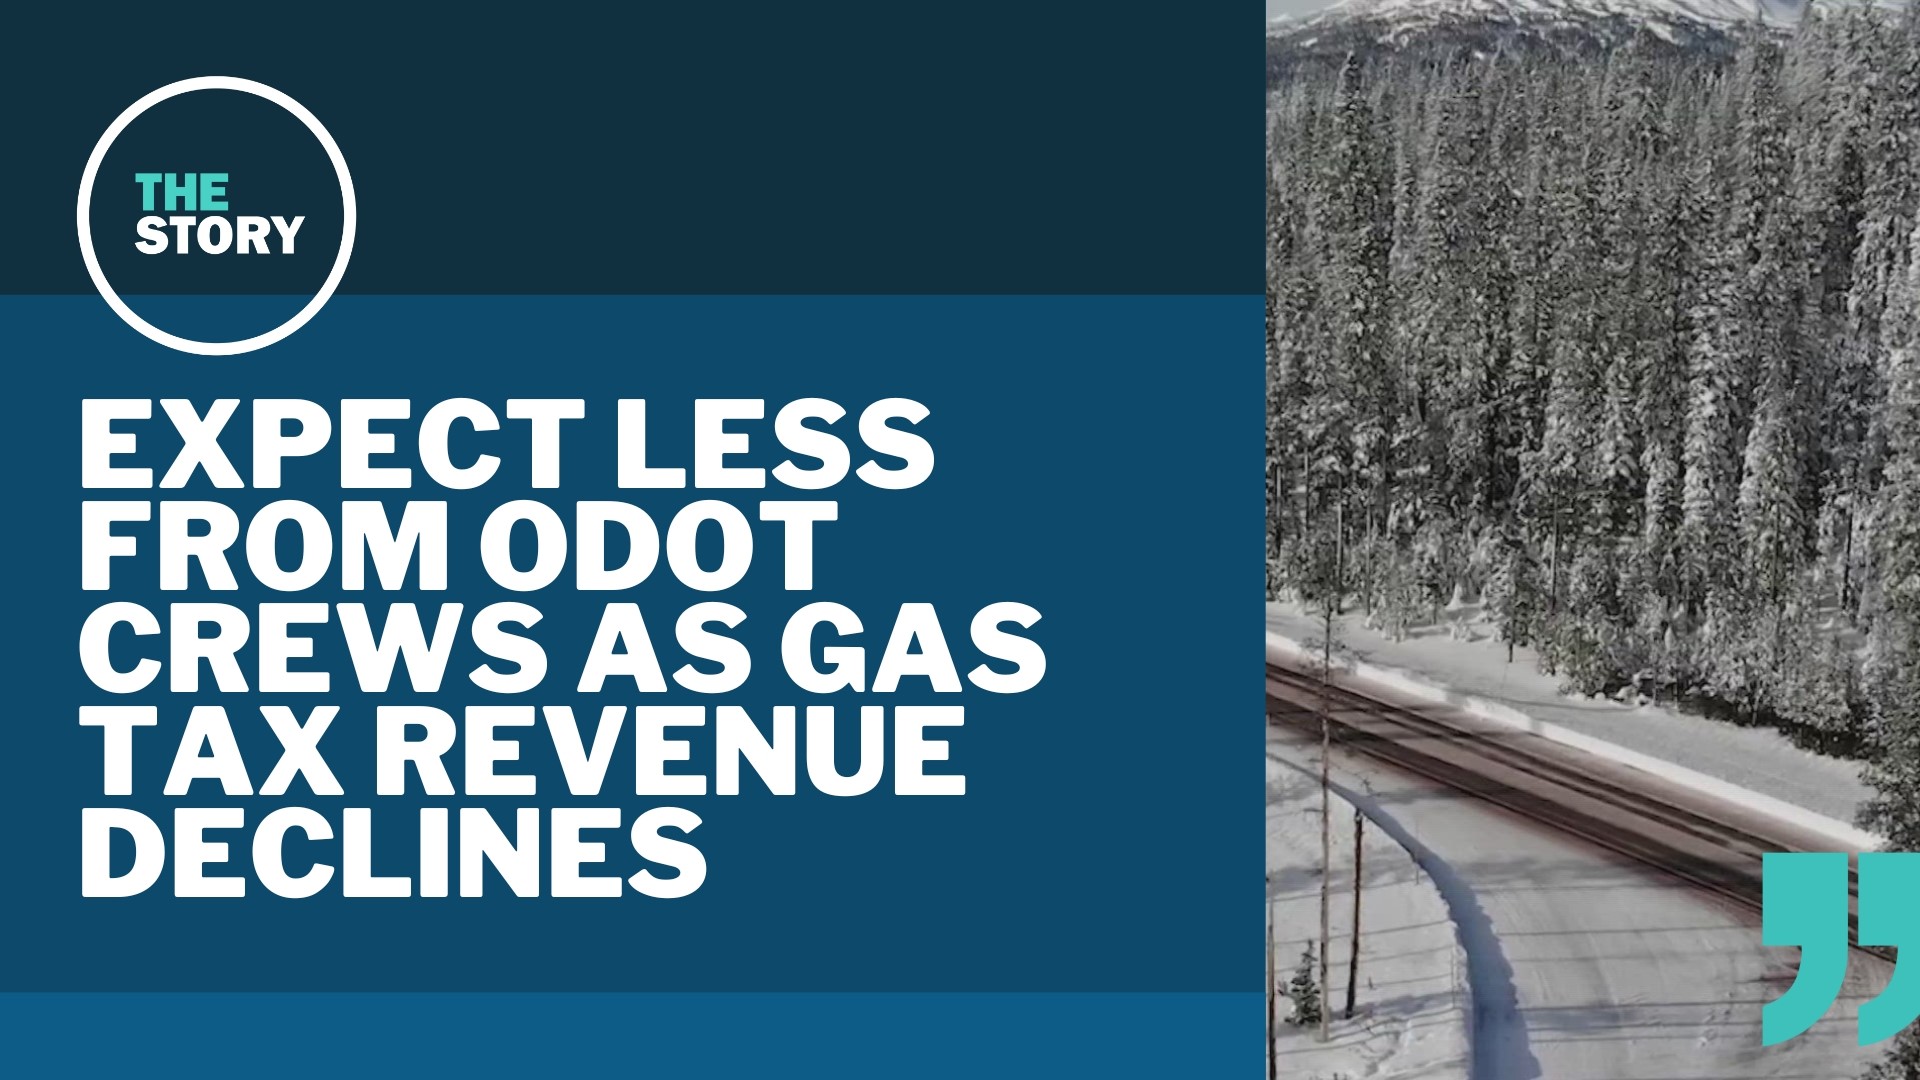 Snowstorms tend to stretch ODOT maintenance crews to their limits, and those limits will be a little lower this year due to declines in Oregon's gas tax revenue.